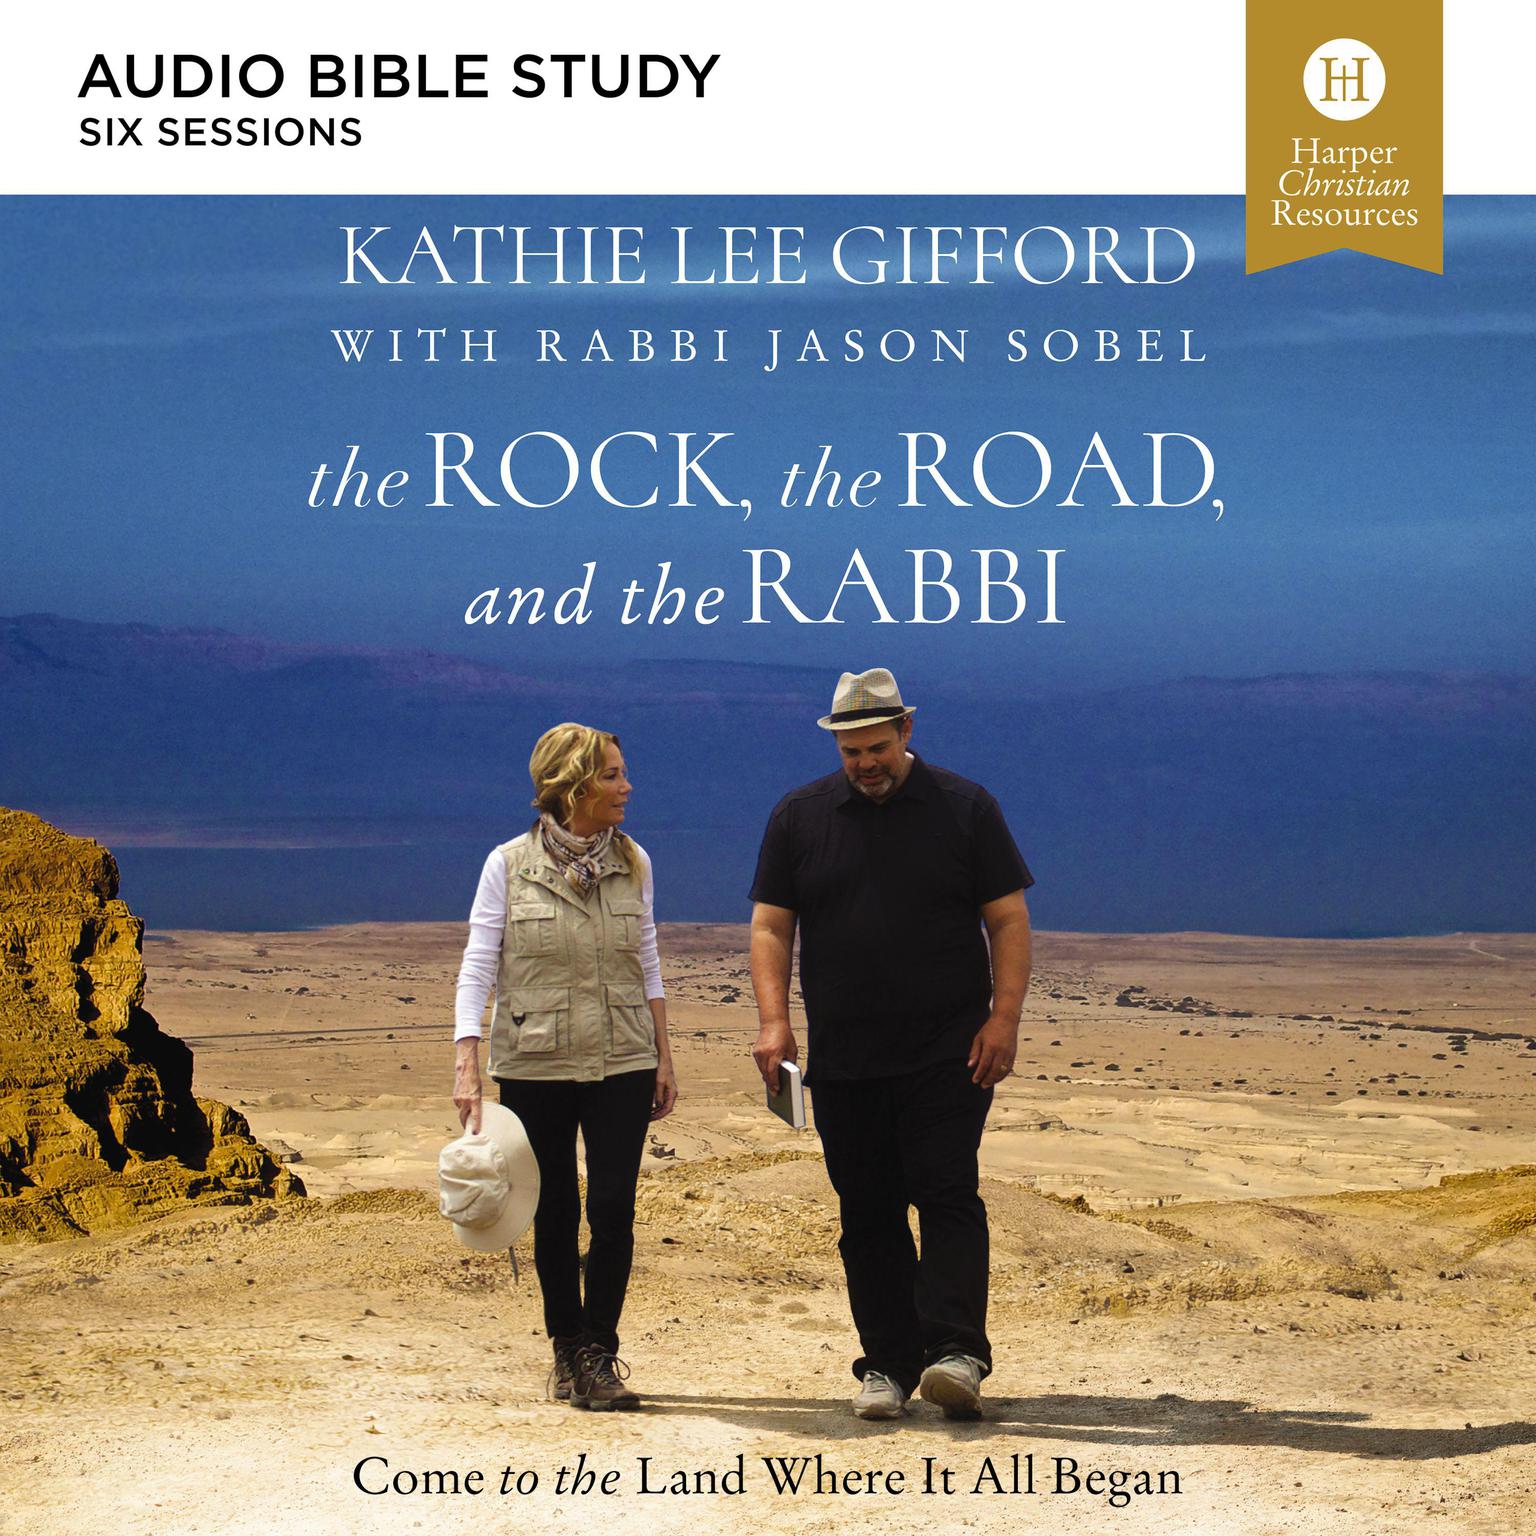 The Rock, the Road, and the Rabbi: Audio Bible Studies: Come to the Land Where It All Began Audiobook, by Kathie Lee Gifford